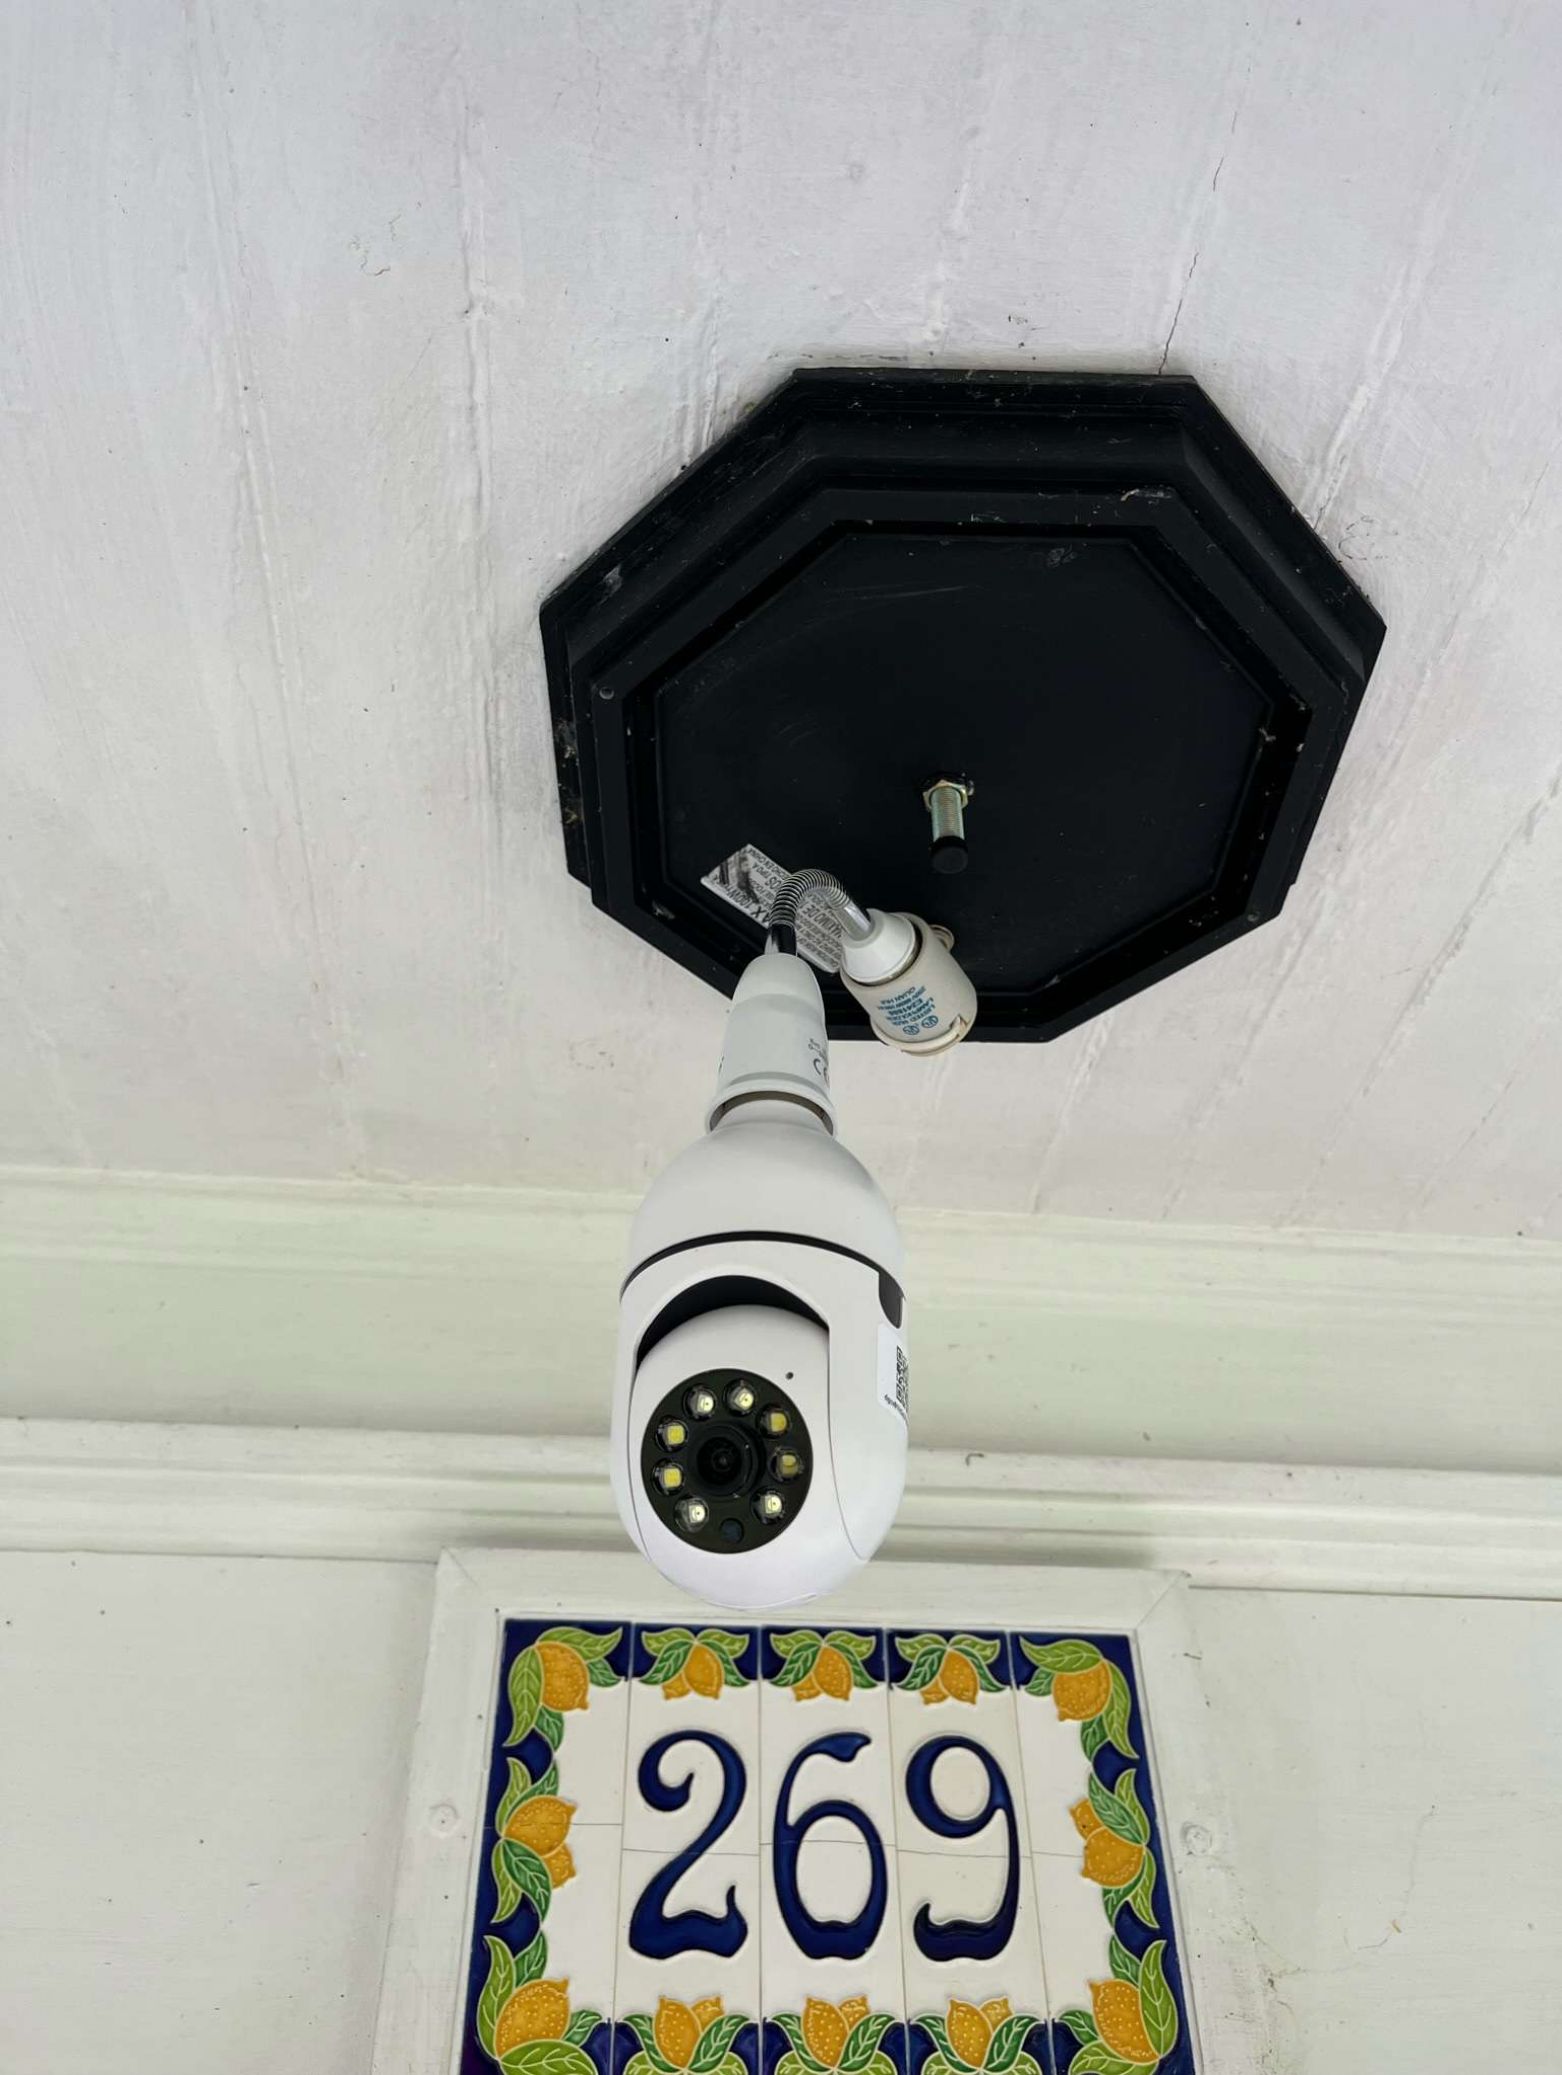 Nomad Security Camera Specifications